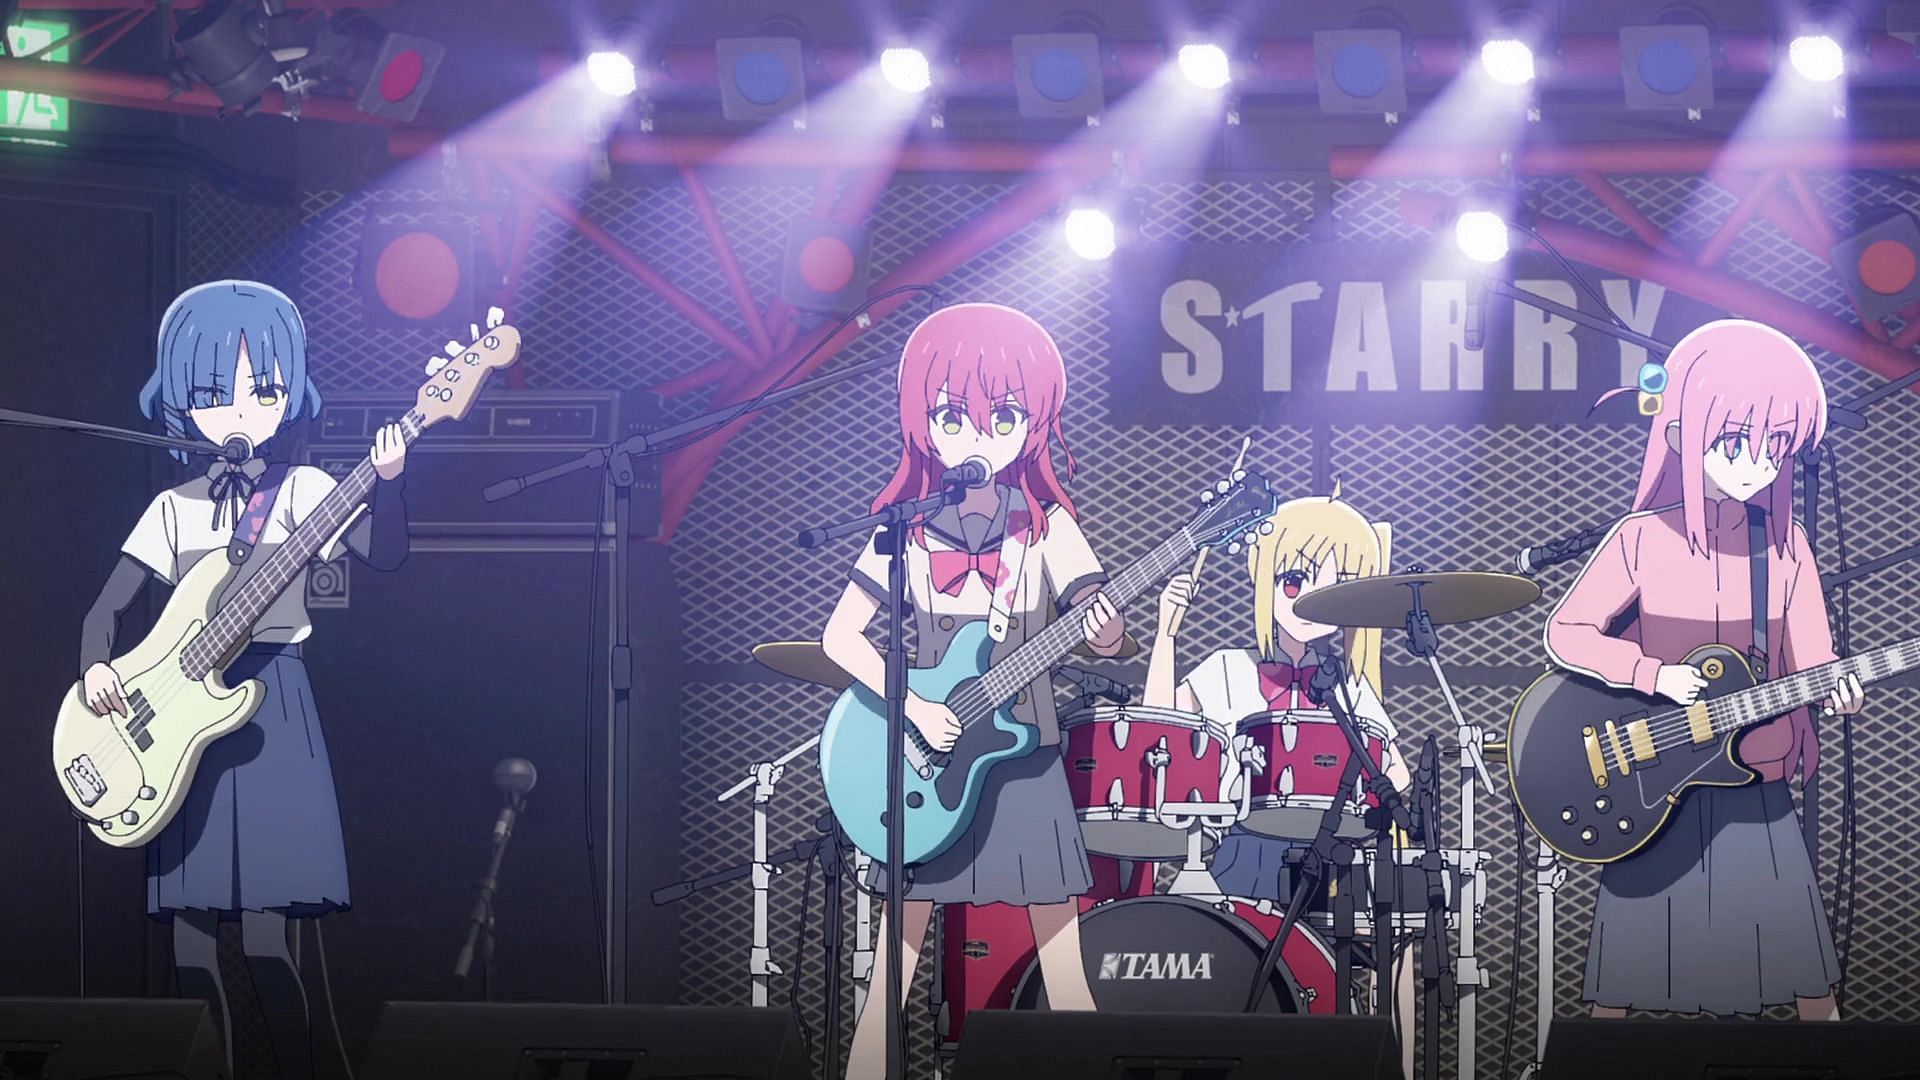 Kessoku Band members as seen performing in the anime (Image via CloveWorks)